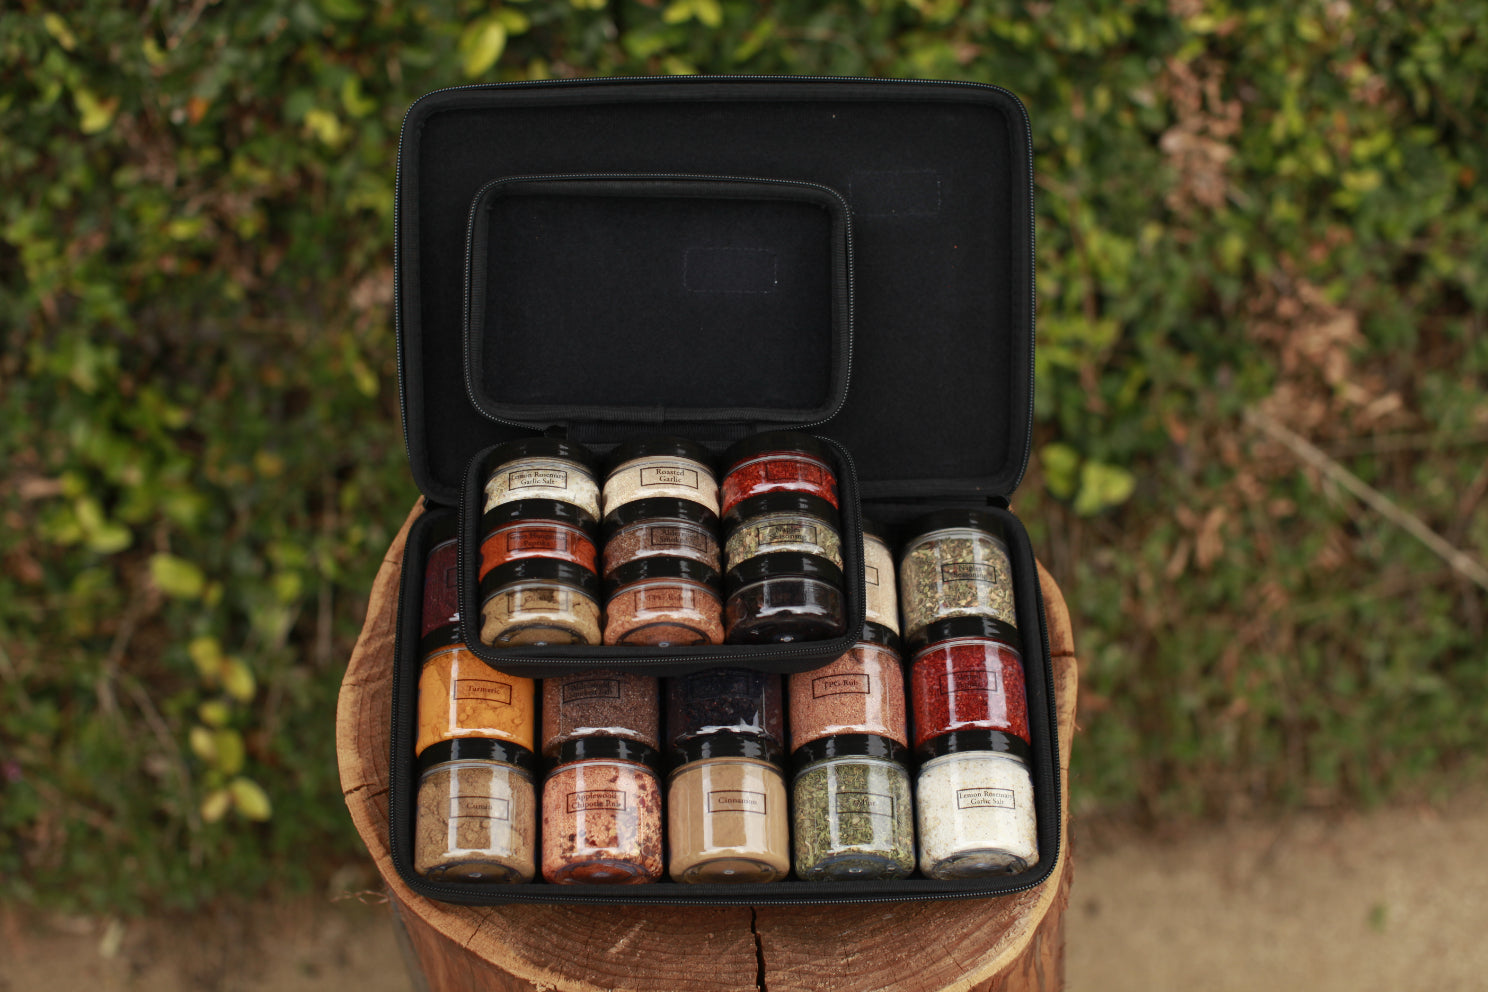 Spice Up Your Life With These Travel Spice And Condiment Containers